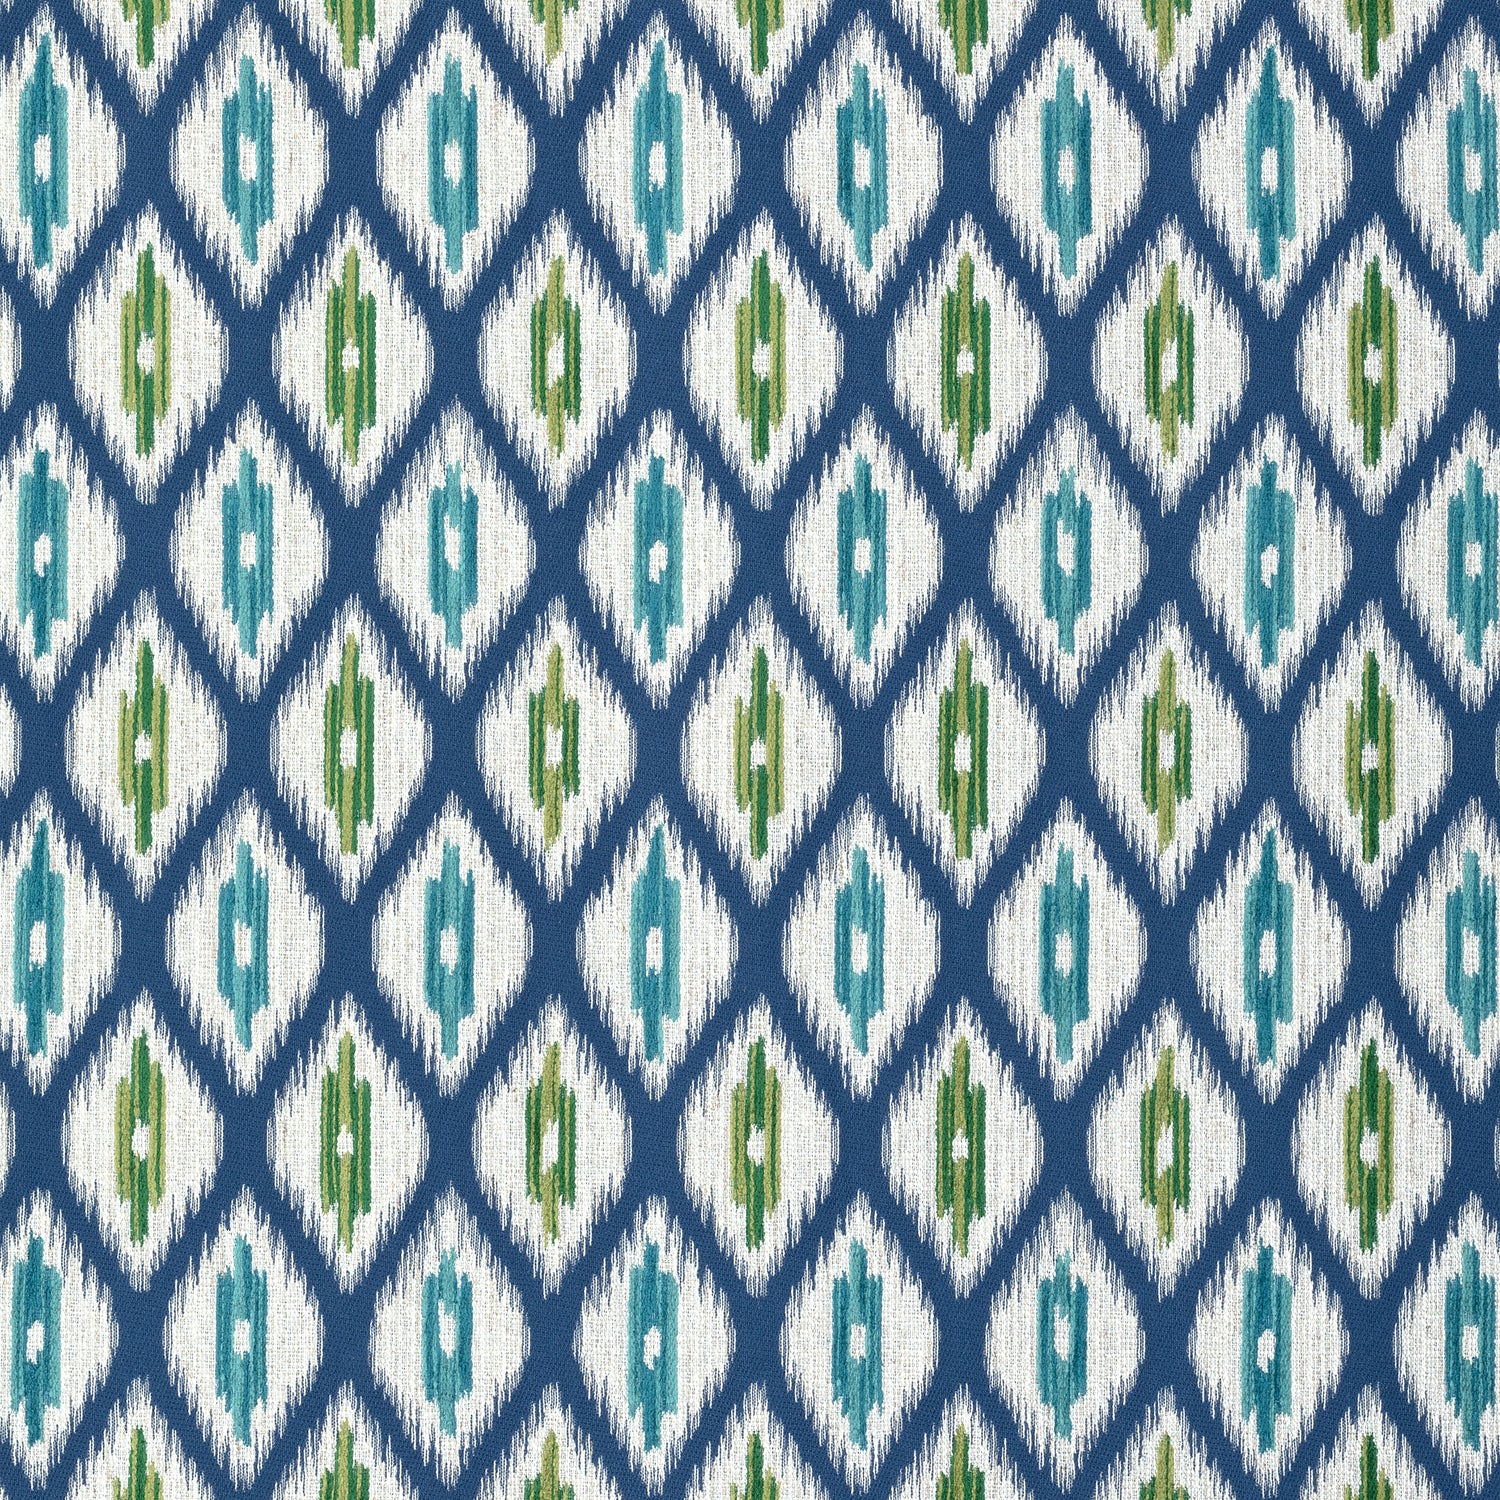 Rajah fabric in marine blue color - pattern number W73361 - by Thibaut in the Nomad collection